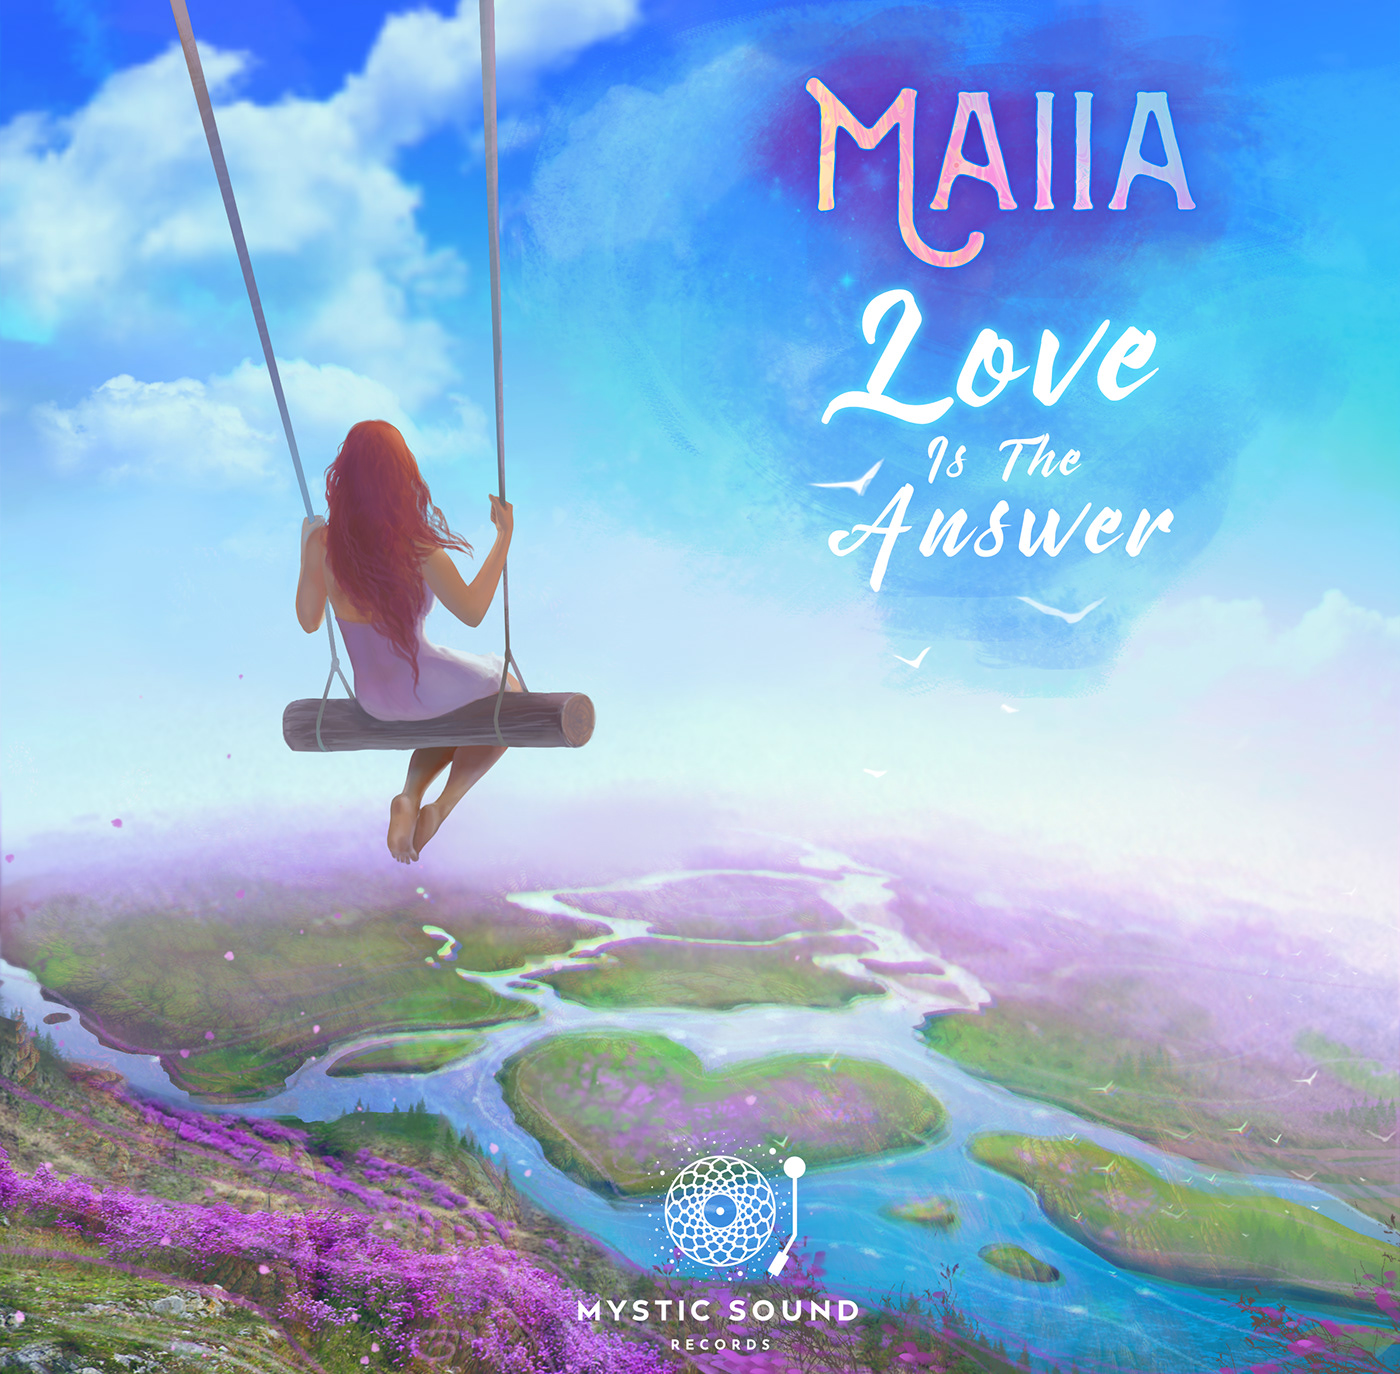 The answer is dream. Maiia303. Maiia discography. Angels (Love is the answer) обложка. Mystic Dream обложка альбома.